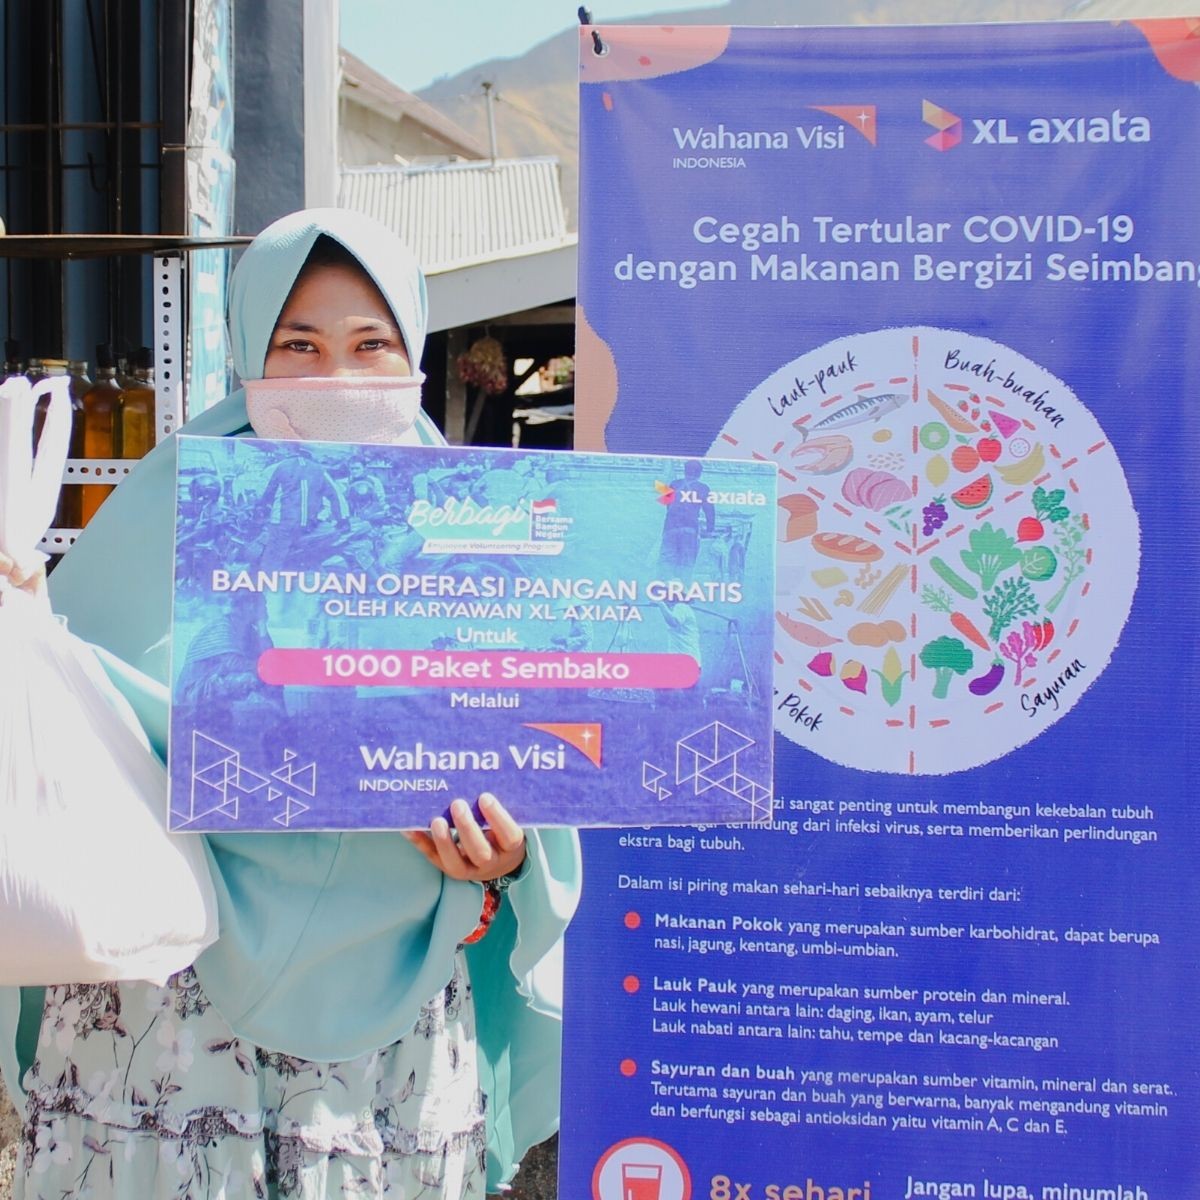 XL Axiata Provides Nutritious Food Aid for People in Kalimantan, NTB and NTT